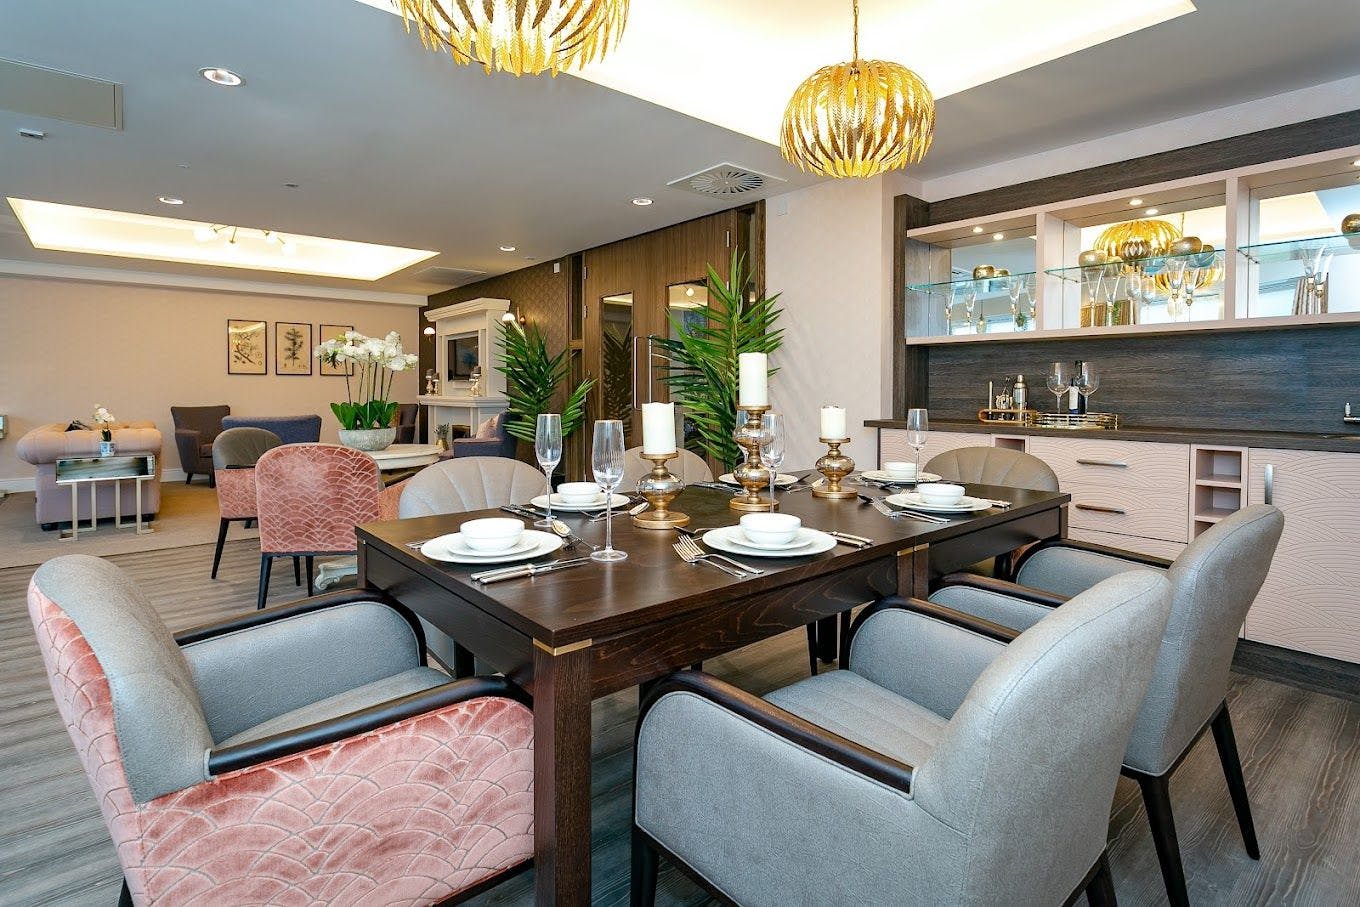 Dining area of Harcourt Gardens care home in Harrogate, Yorkshire